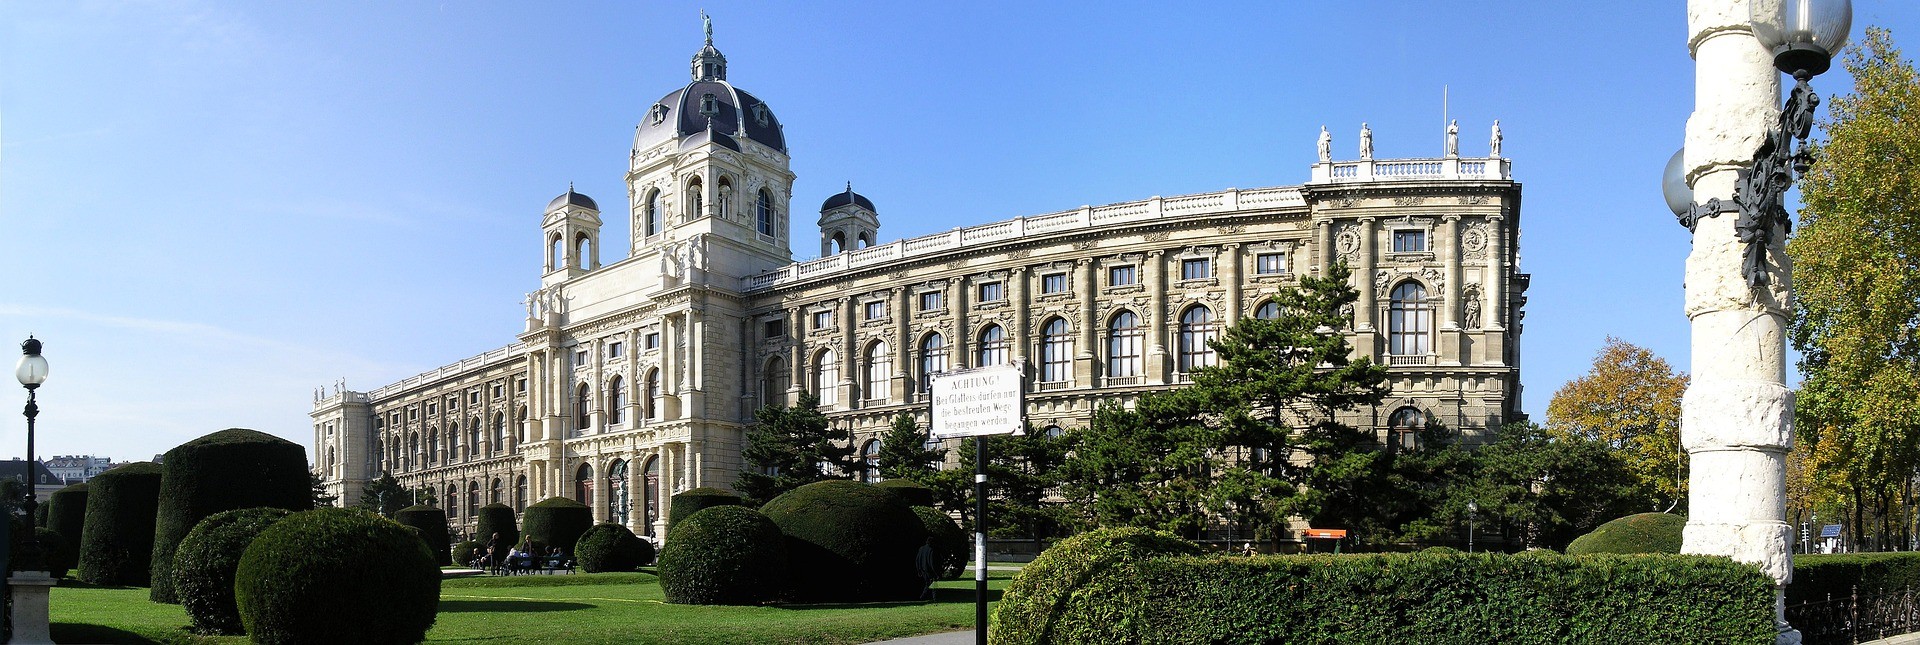 Natural History Museum, Vienna: All year